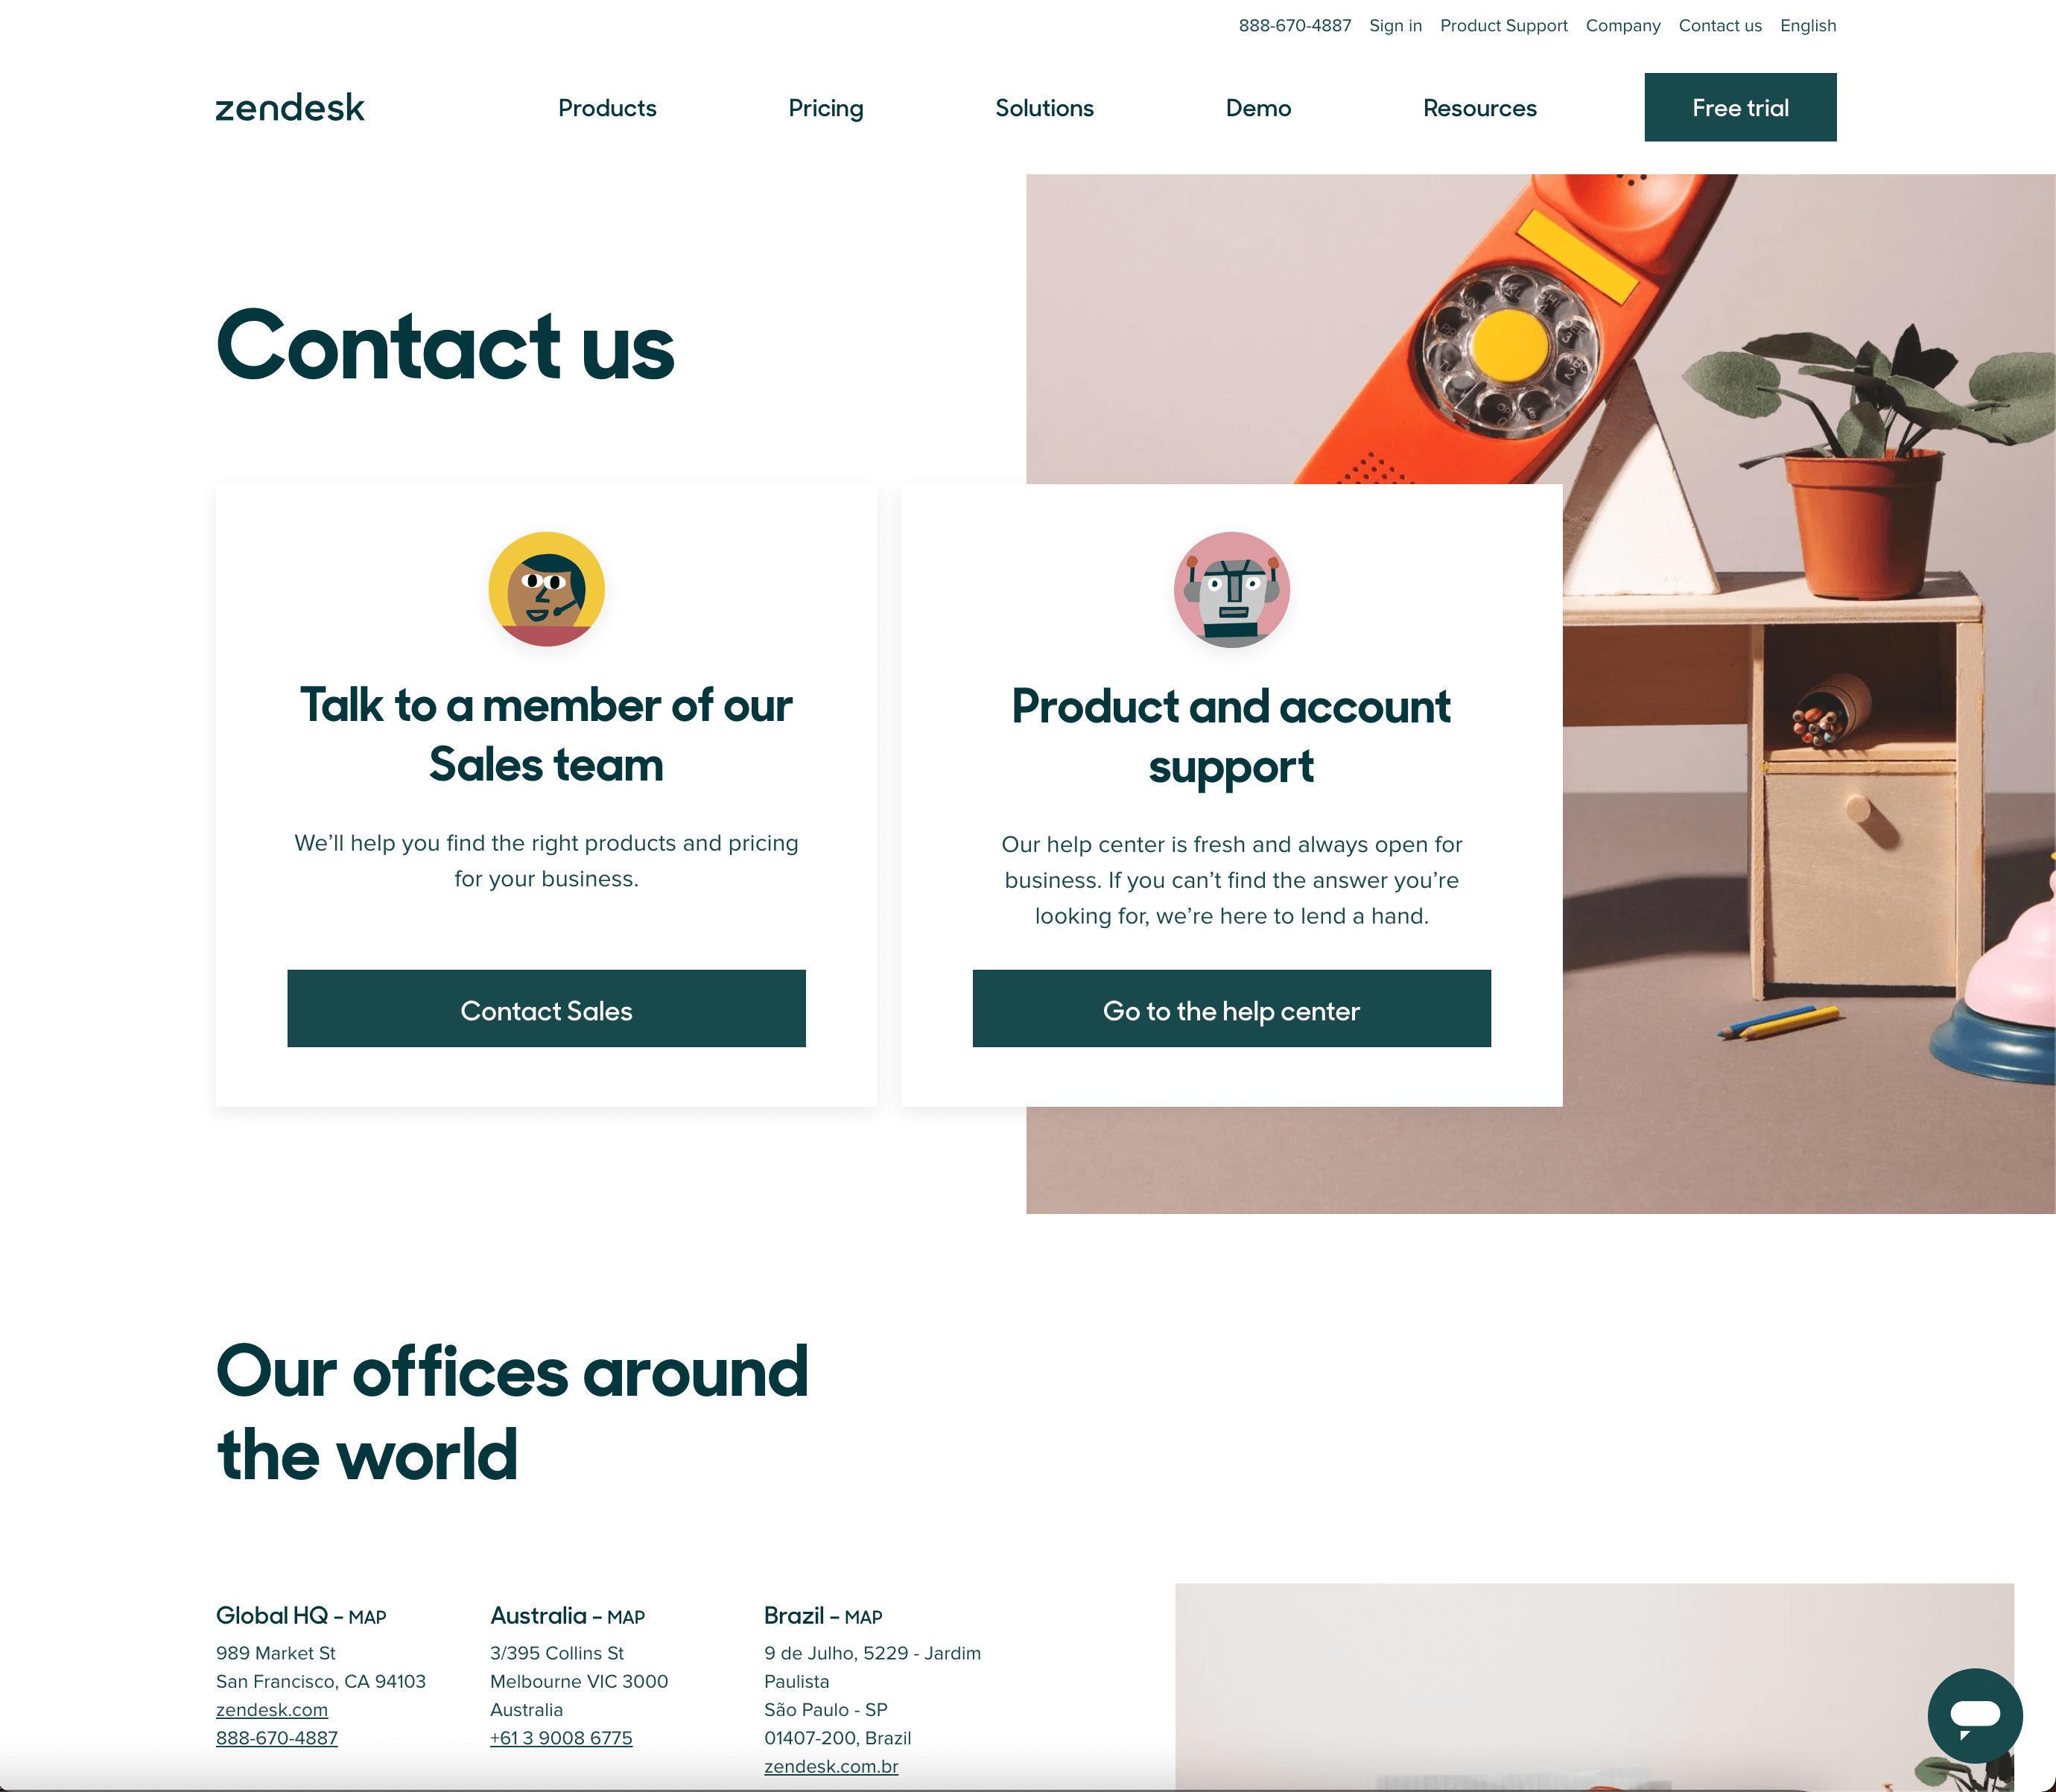 Zendesk's Contact Us Page